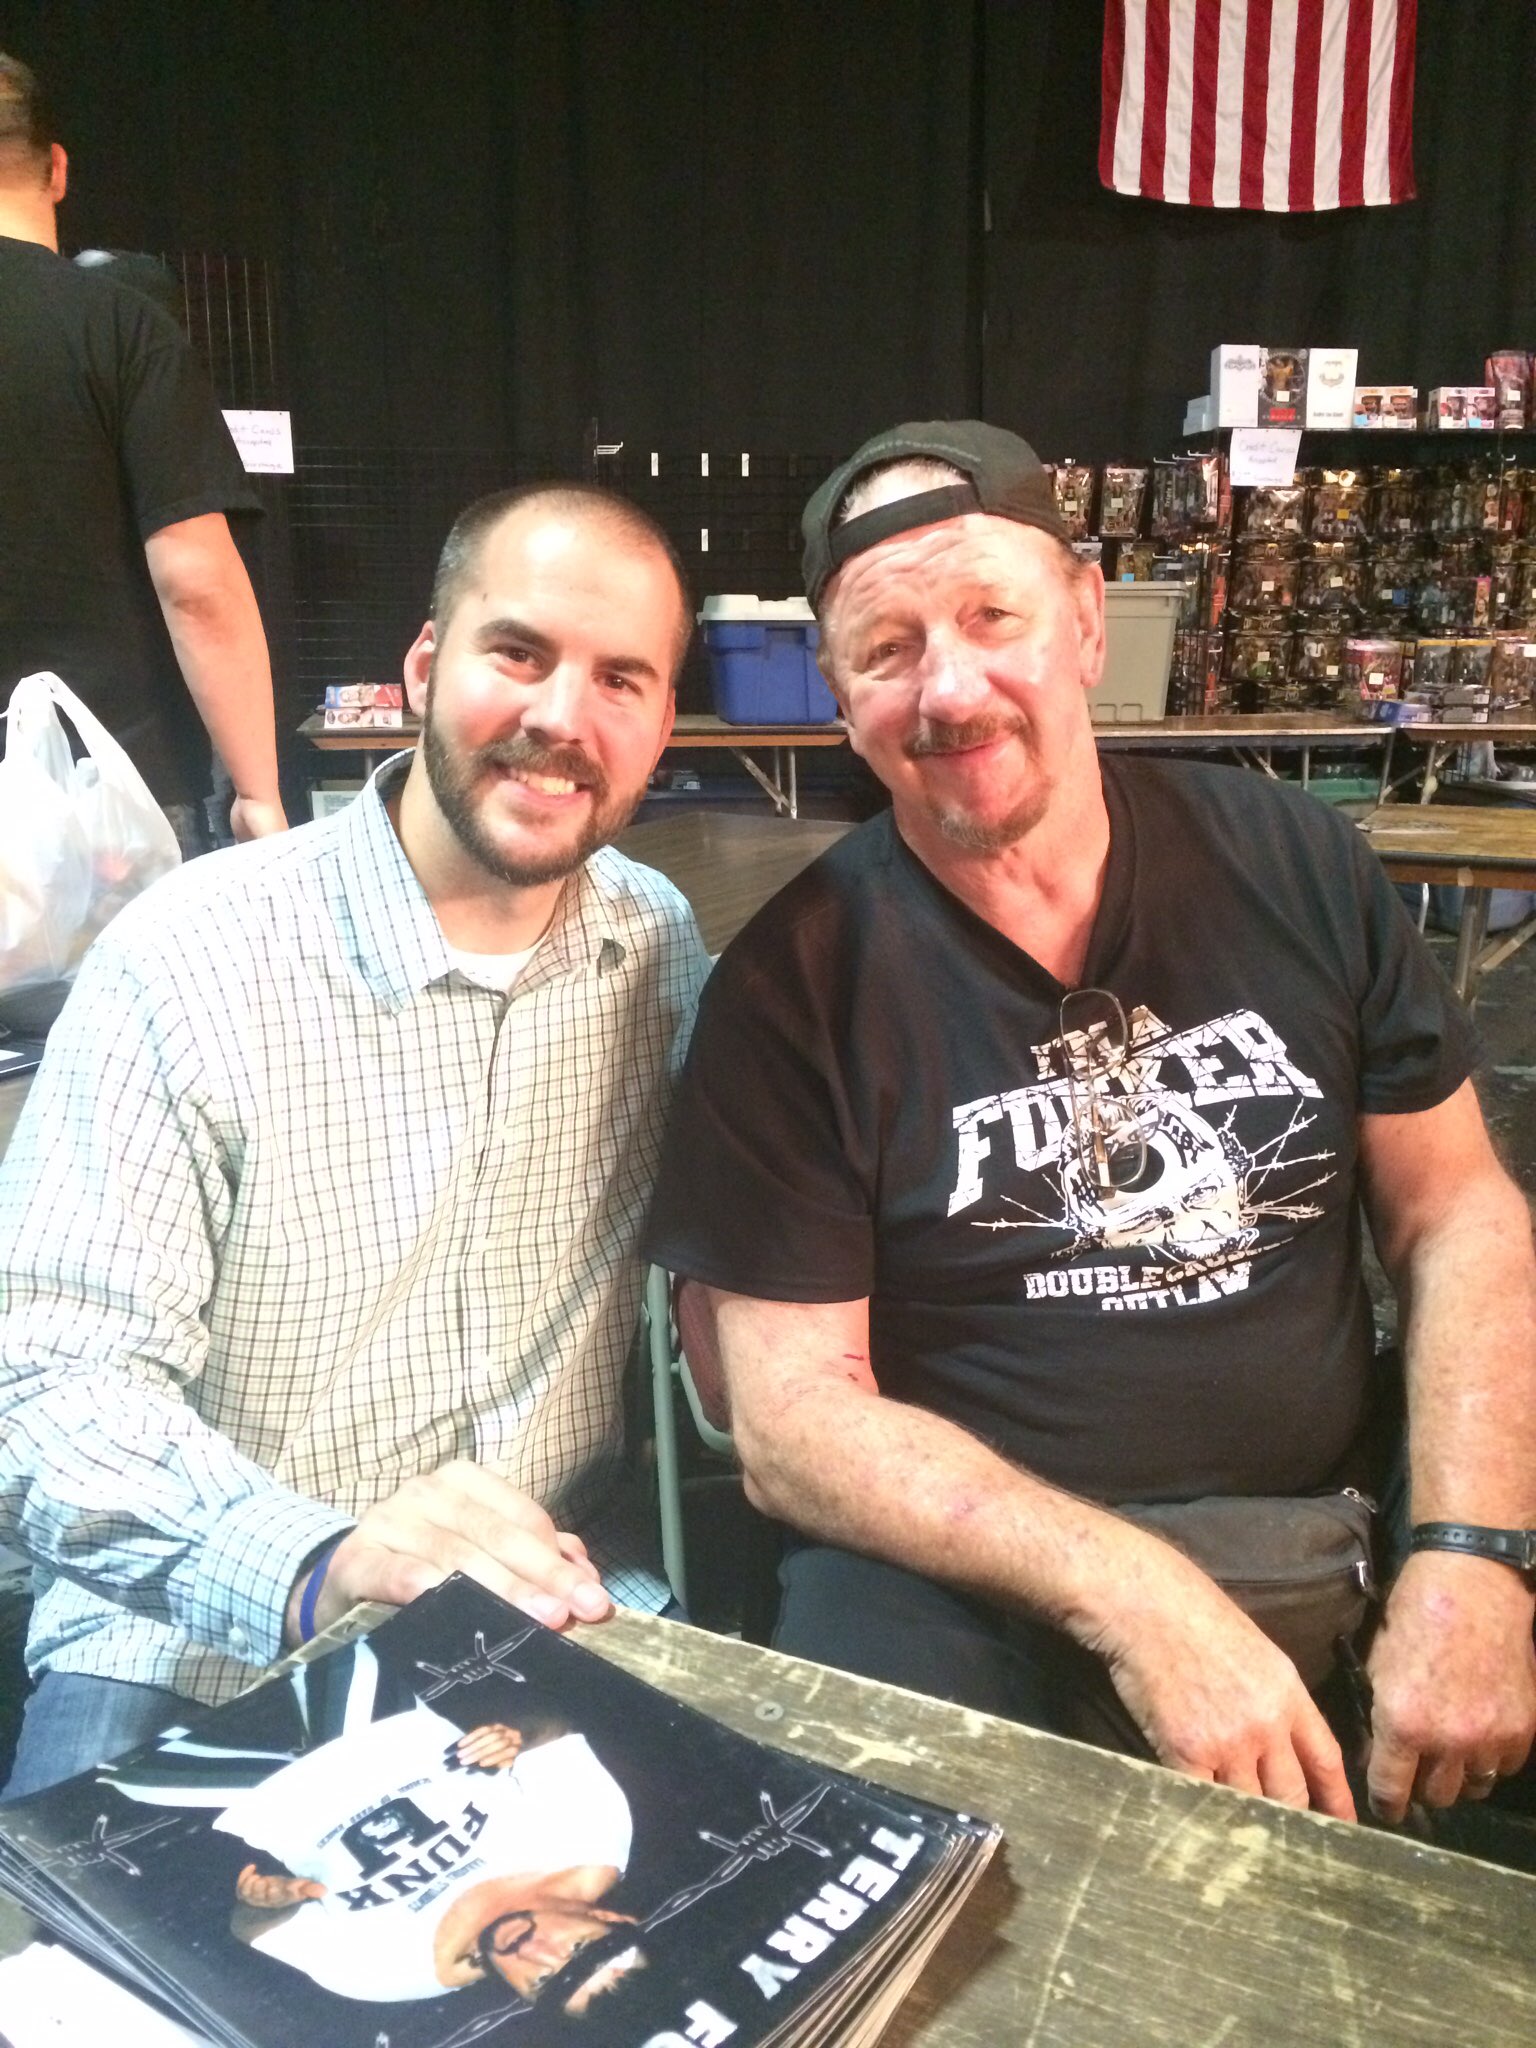 Happy birthday to the Funker, Terry Funk! One of the all time greats! Had the honor of interviewing him twice 